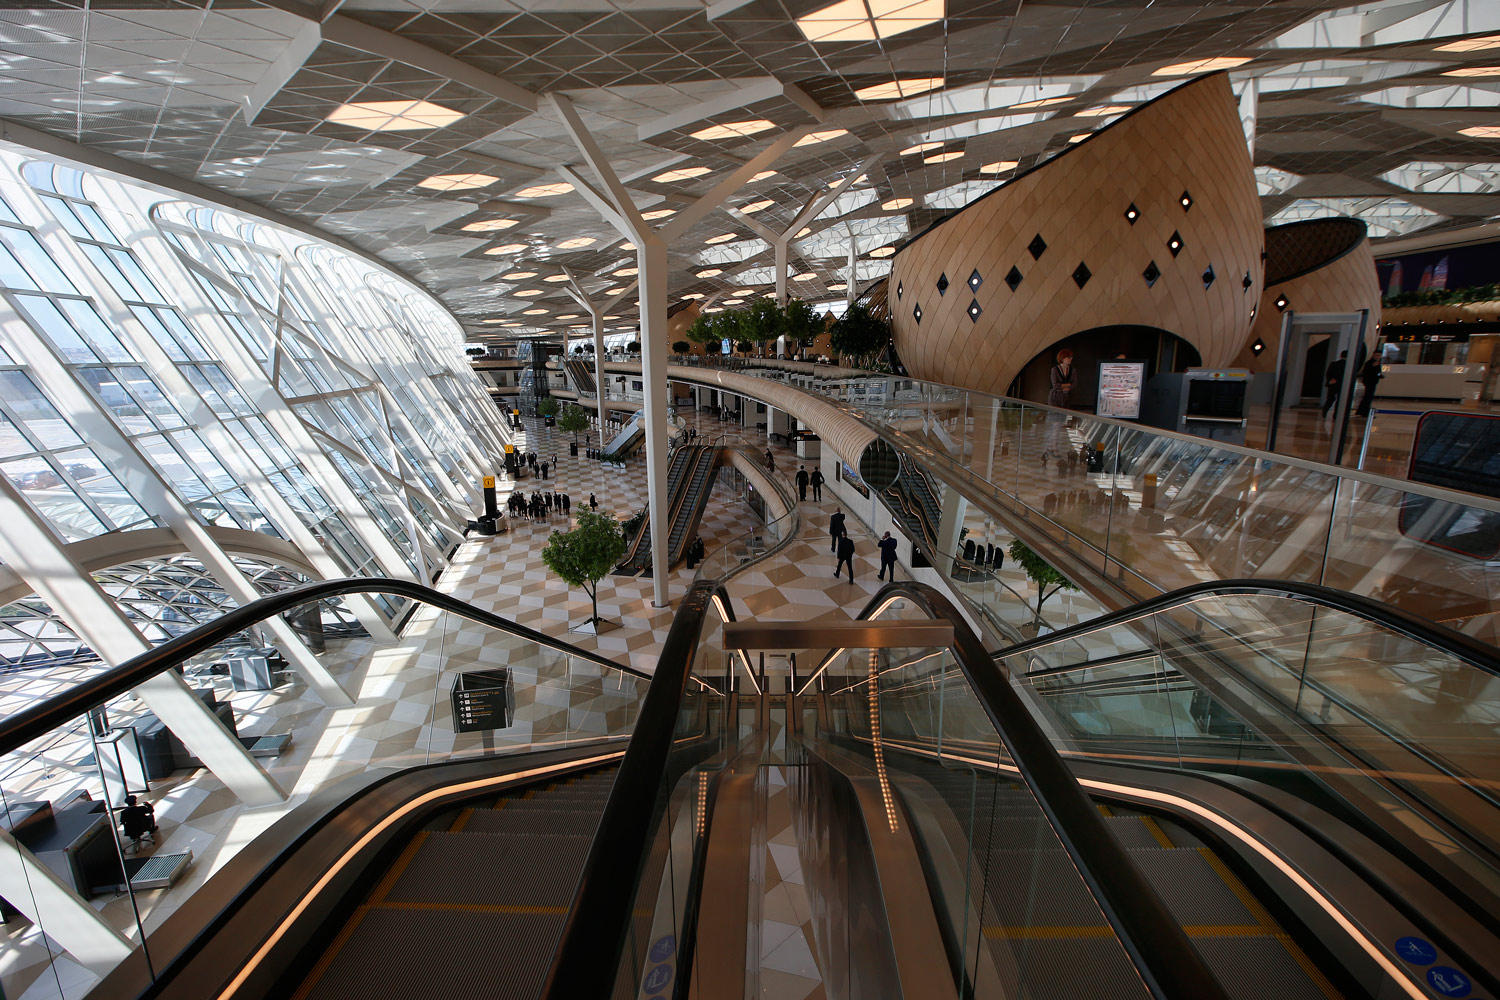 Passenger traffic of Heydar Aliyev Int’l Airport approaches its next record high